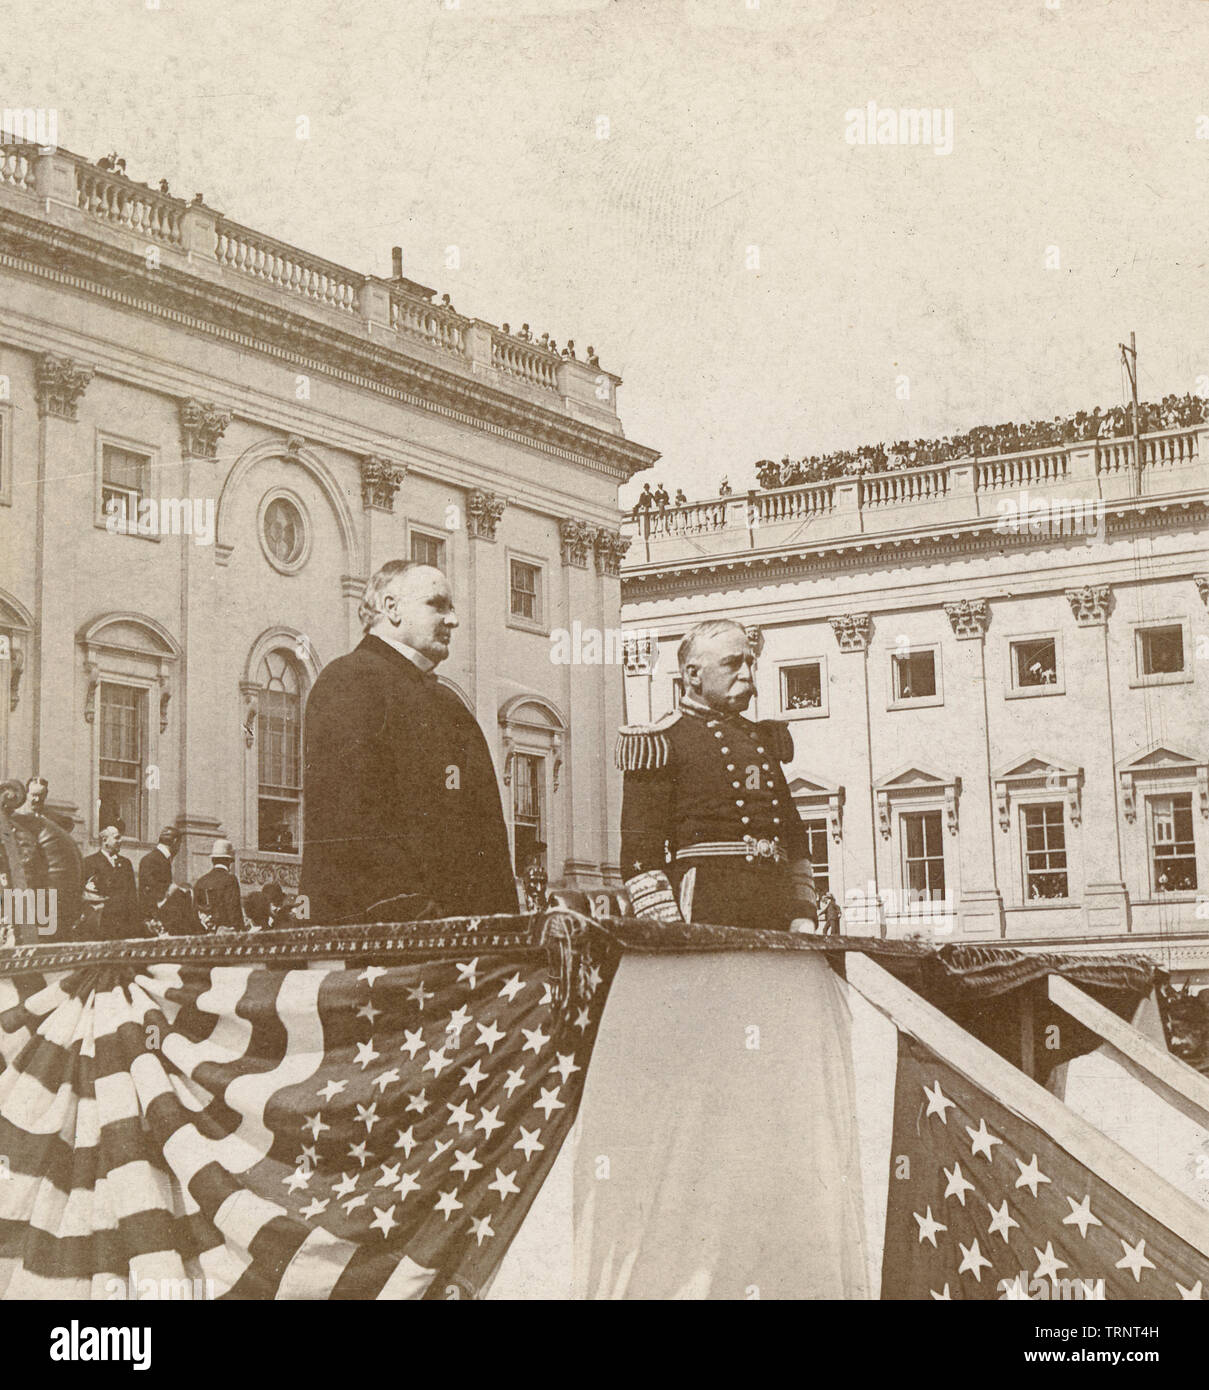 Antique October 3, 1899 photograph, President McKinley and Admiral Dewey reviewing the troops at the Presentation of the Sword in Washington, DC. Original photo by B.L. Singley. SOURCE: ORIGINAL STEREOVIEW CARD. Stock Photo